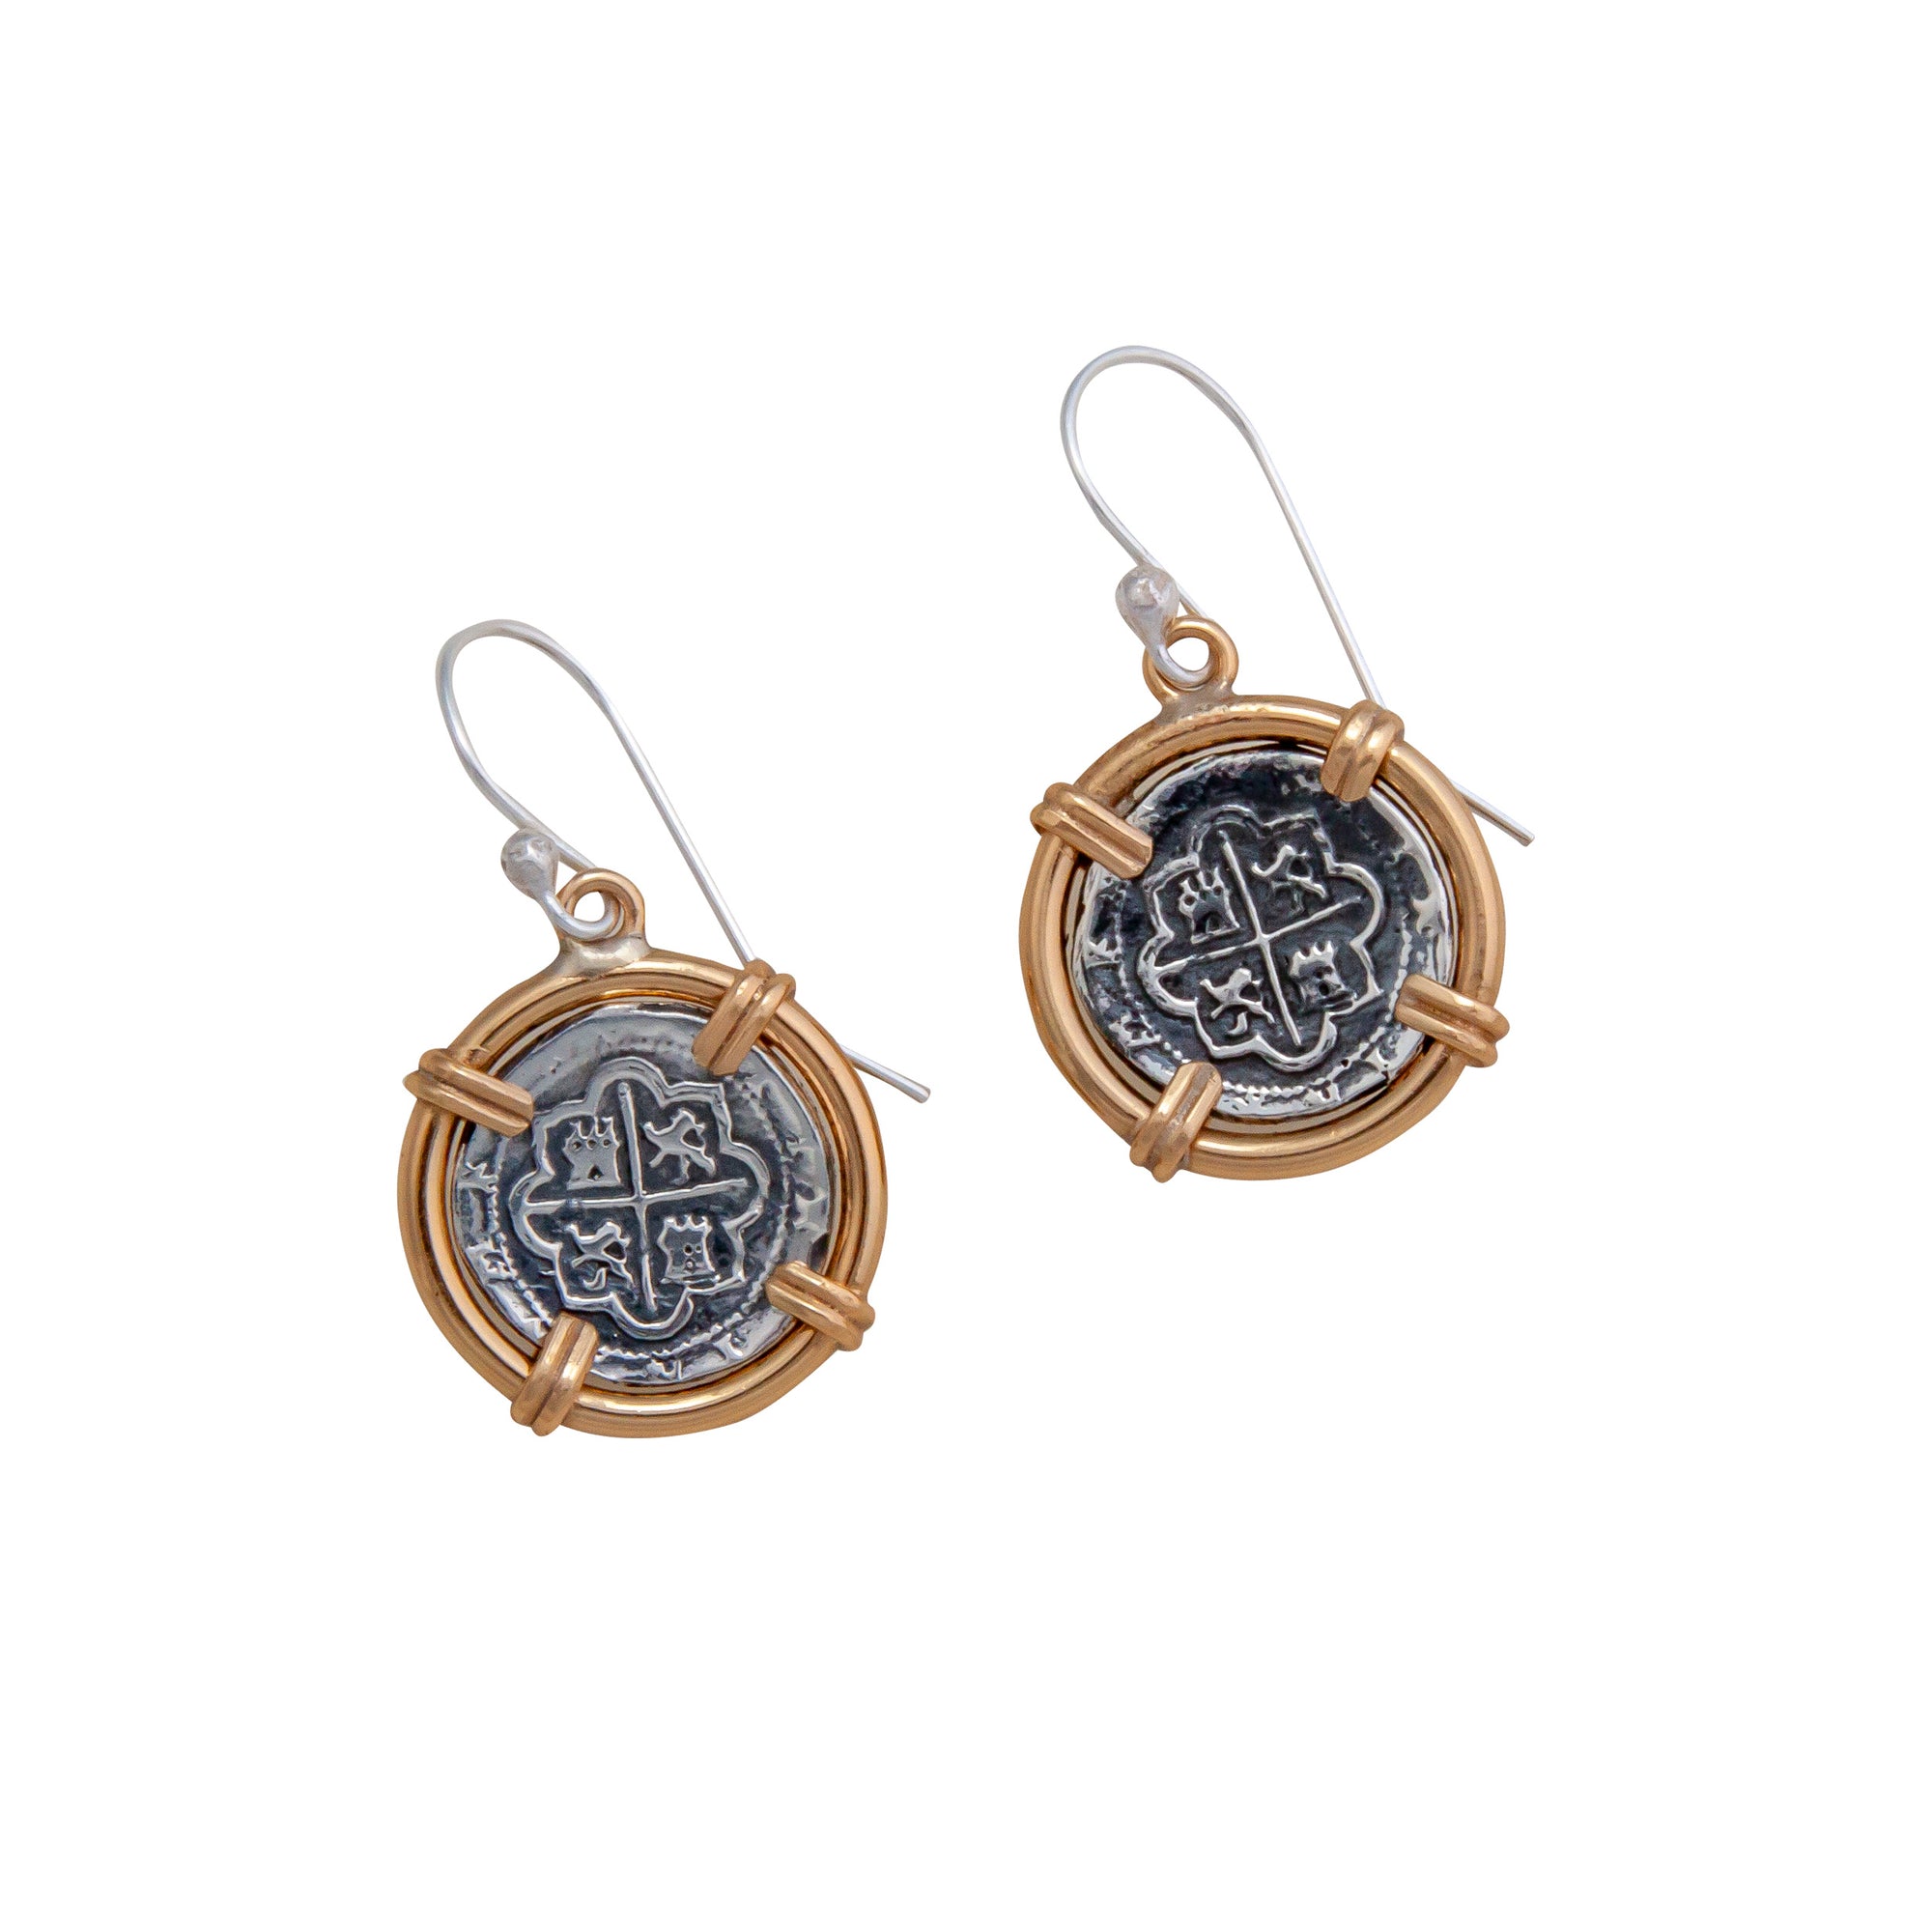 Sterling Silver and Alchemia Replica Spanish Coin Drop Earrings | Charles Albert Jewelry